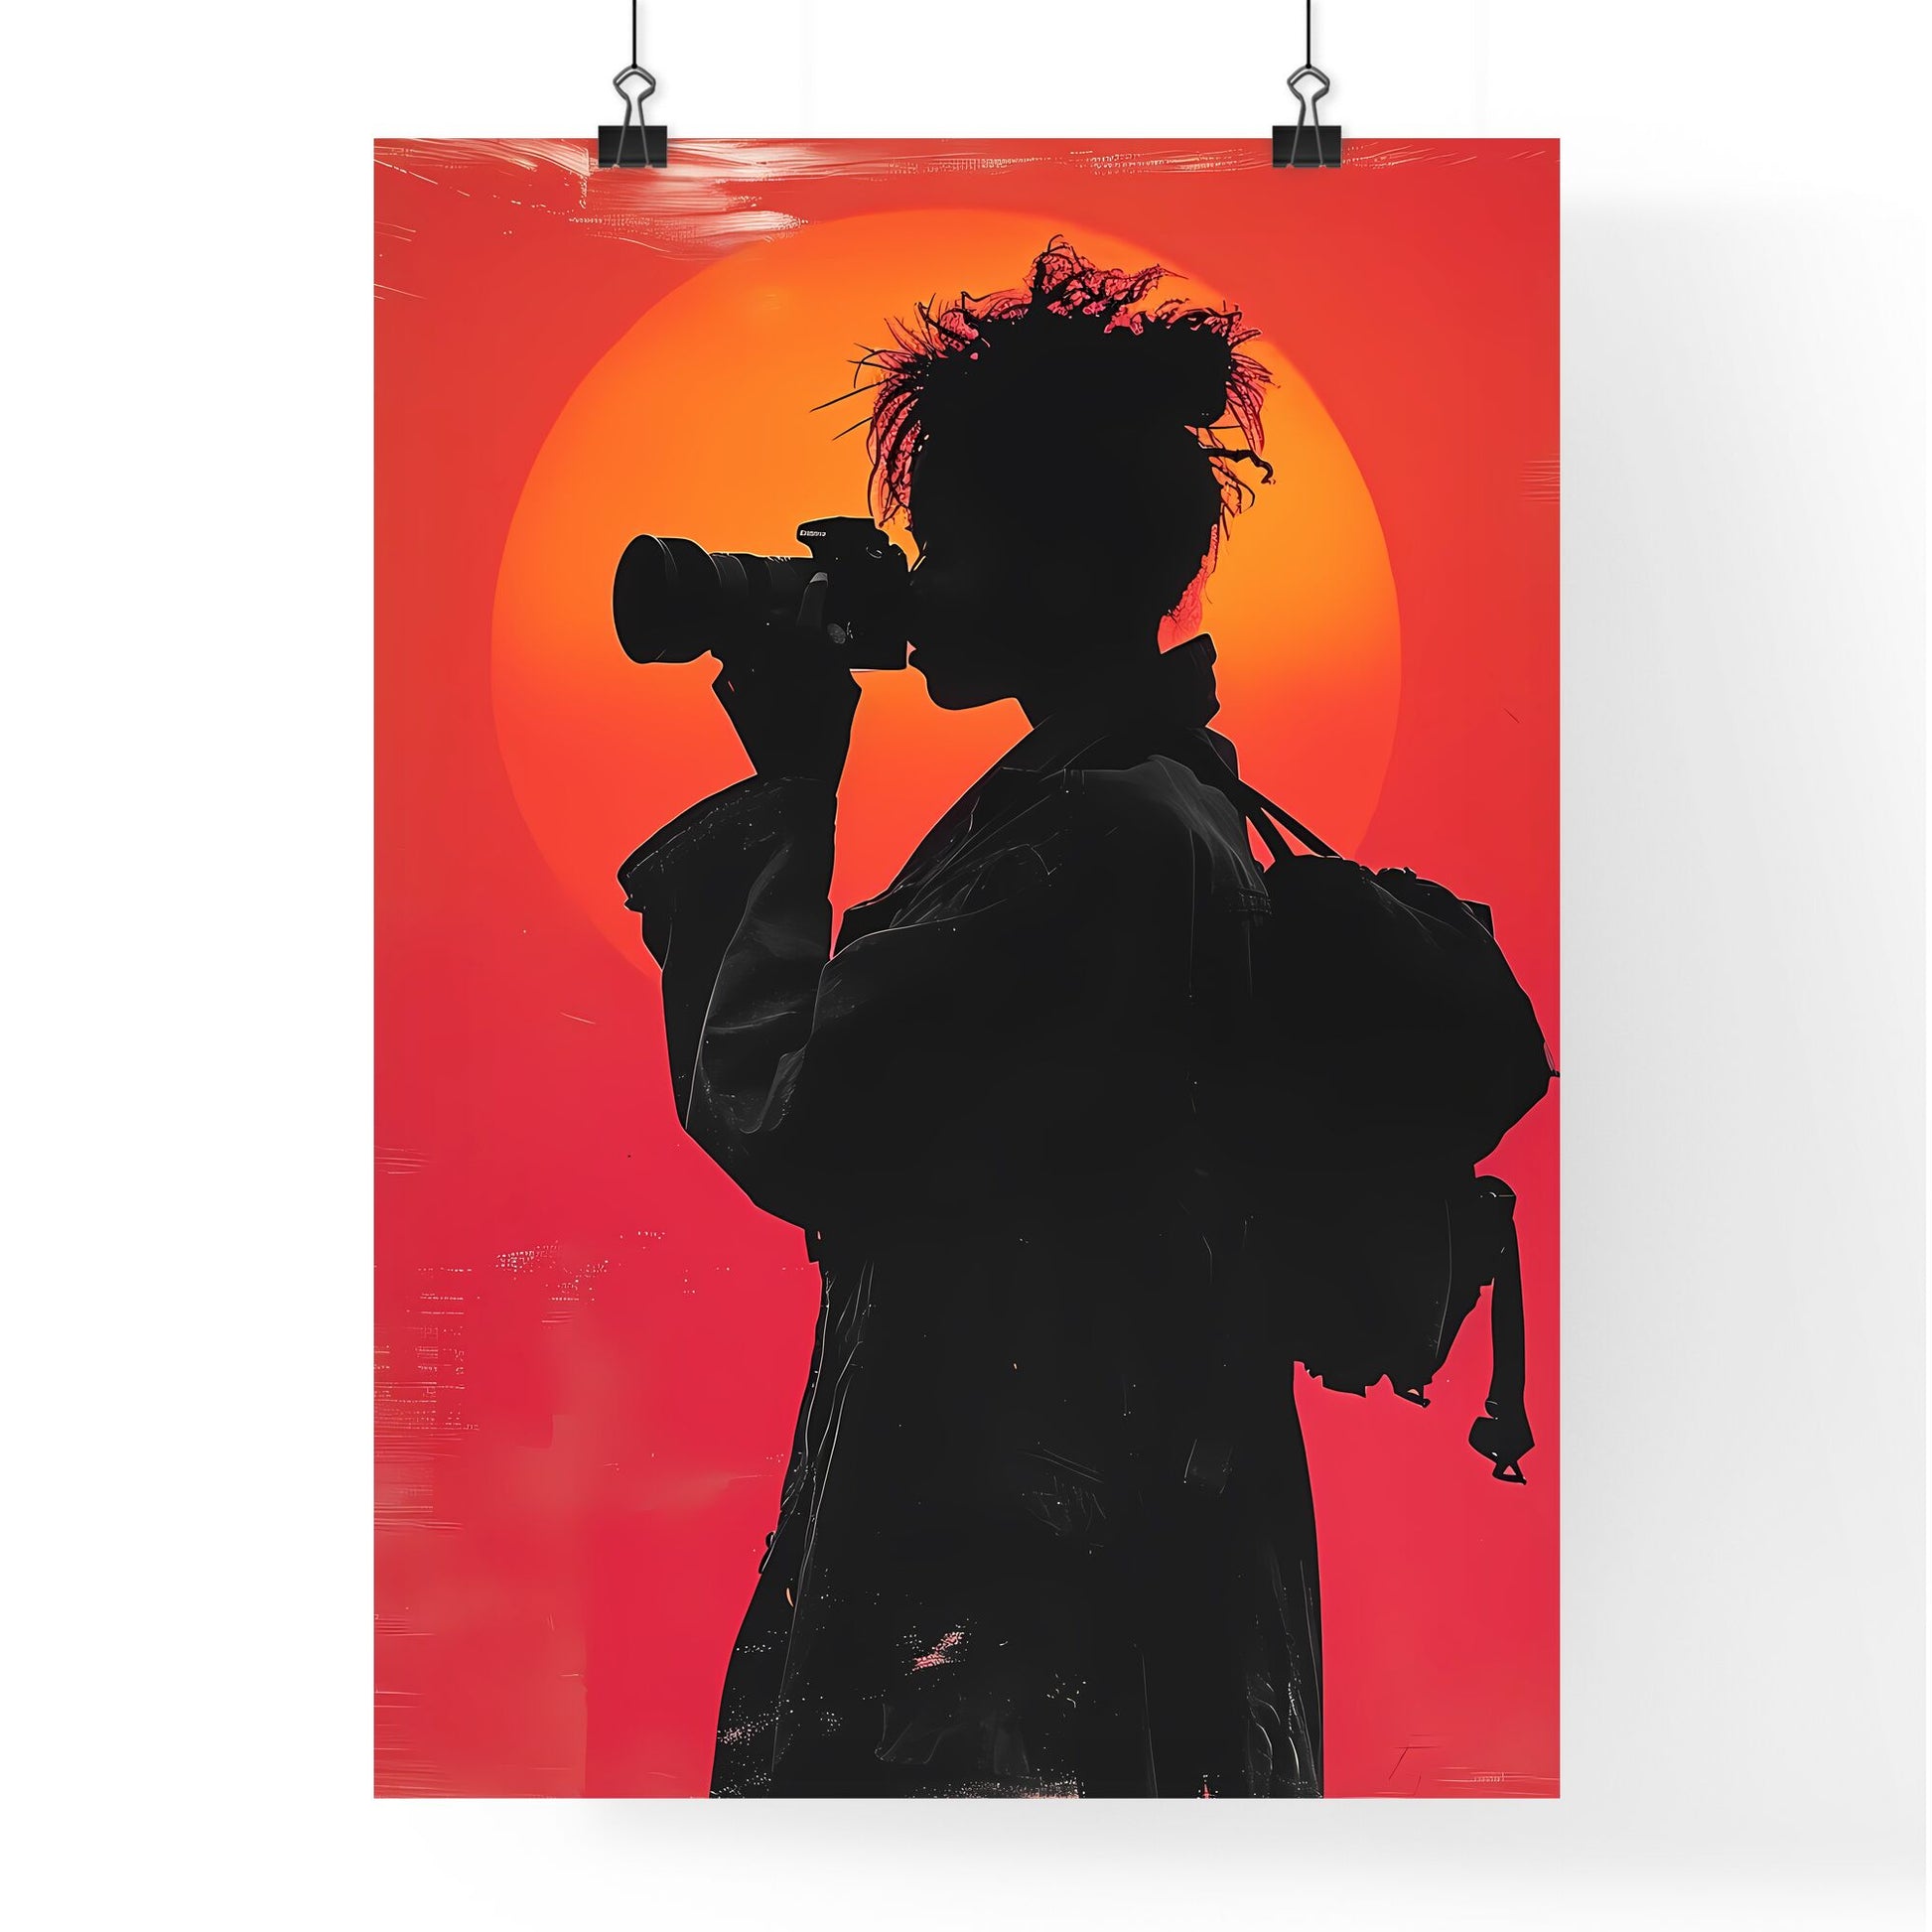 A trendy young person records - Art print of a silhouette of a woman holding a camera Default Title